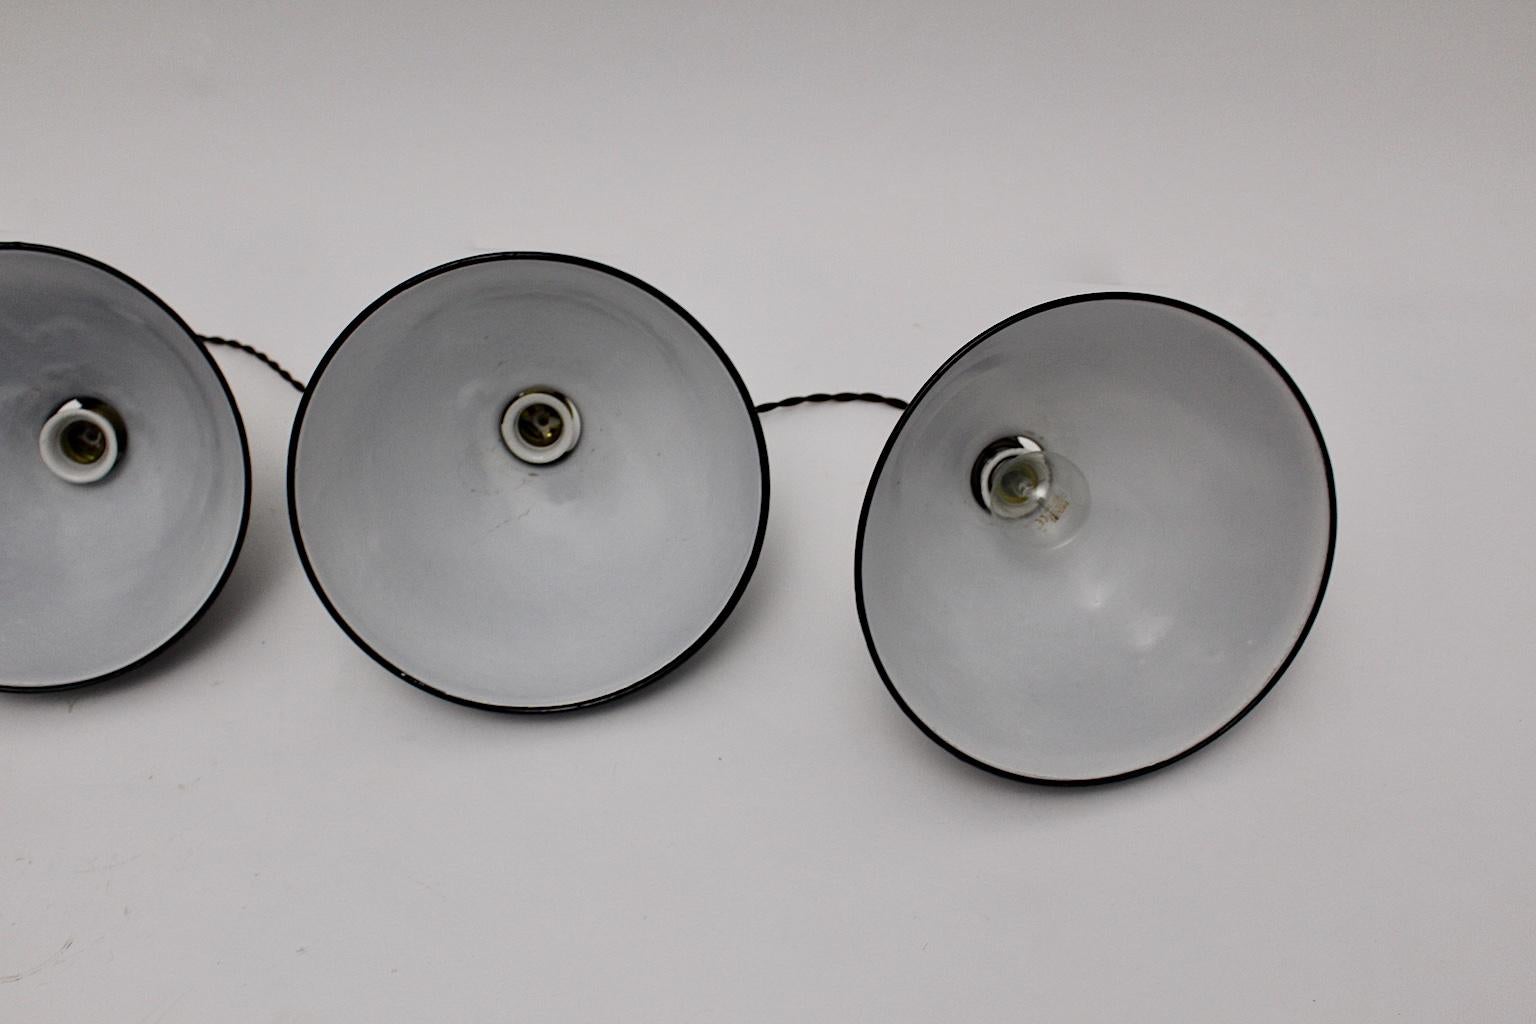 Bauhaus Black and White Vintage Set of four Email Hanging Lamps, 1920s, Germany For Sale 4